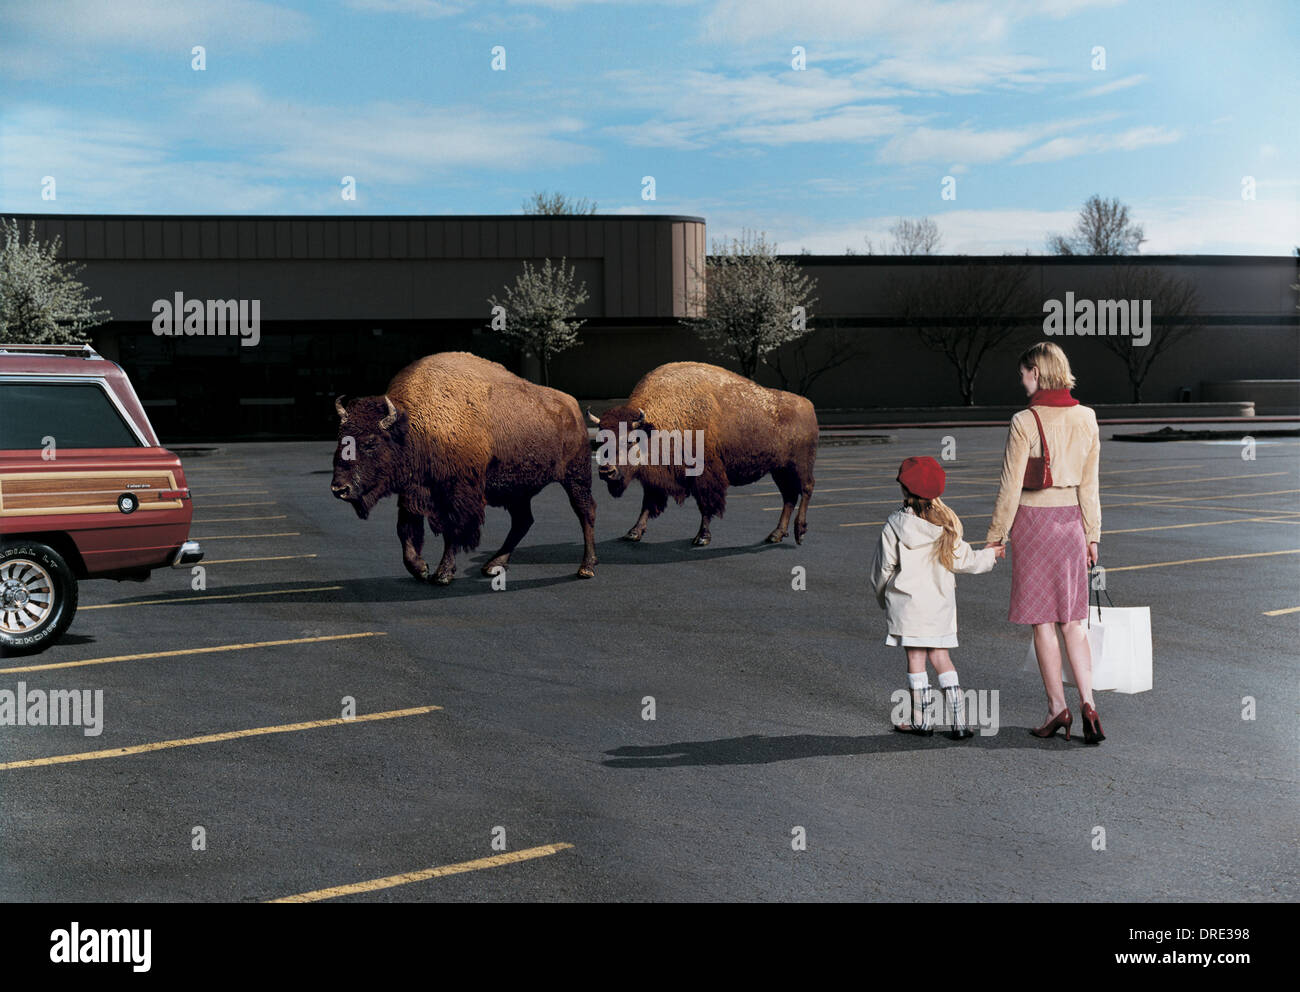 Mother and daughter being passed by bison outside shopping mall Stock Photo